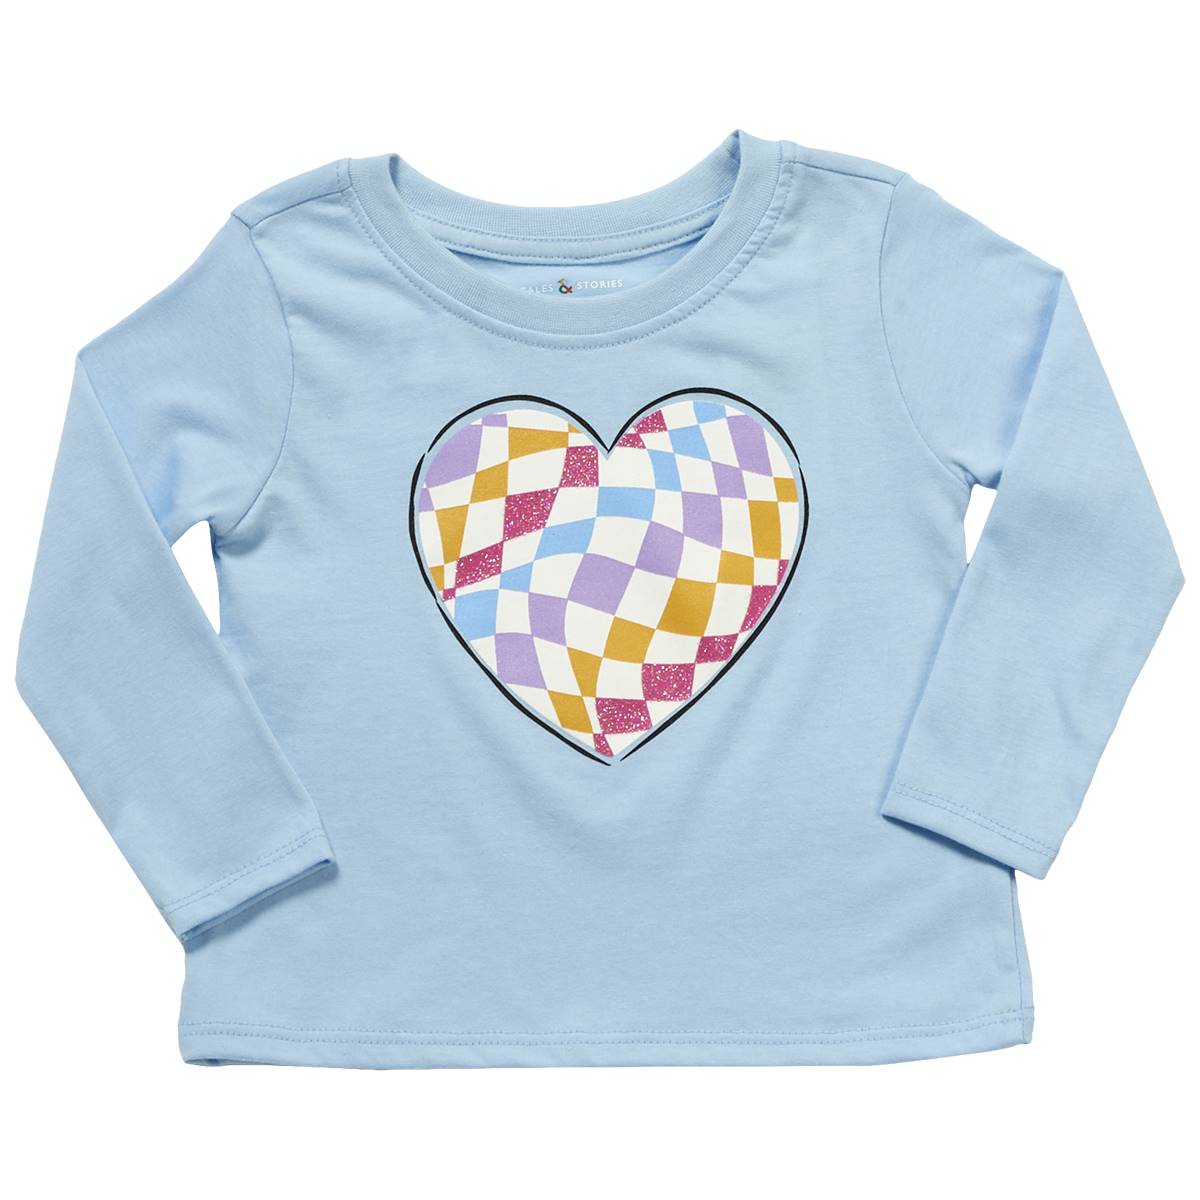 Toddler Girl Tales & Stories Checkered Heart Long Sleeve Tee